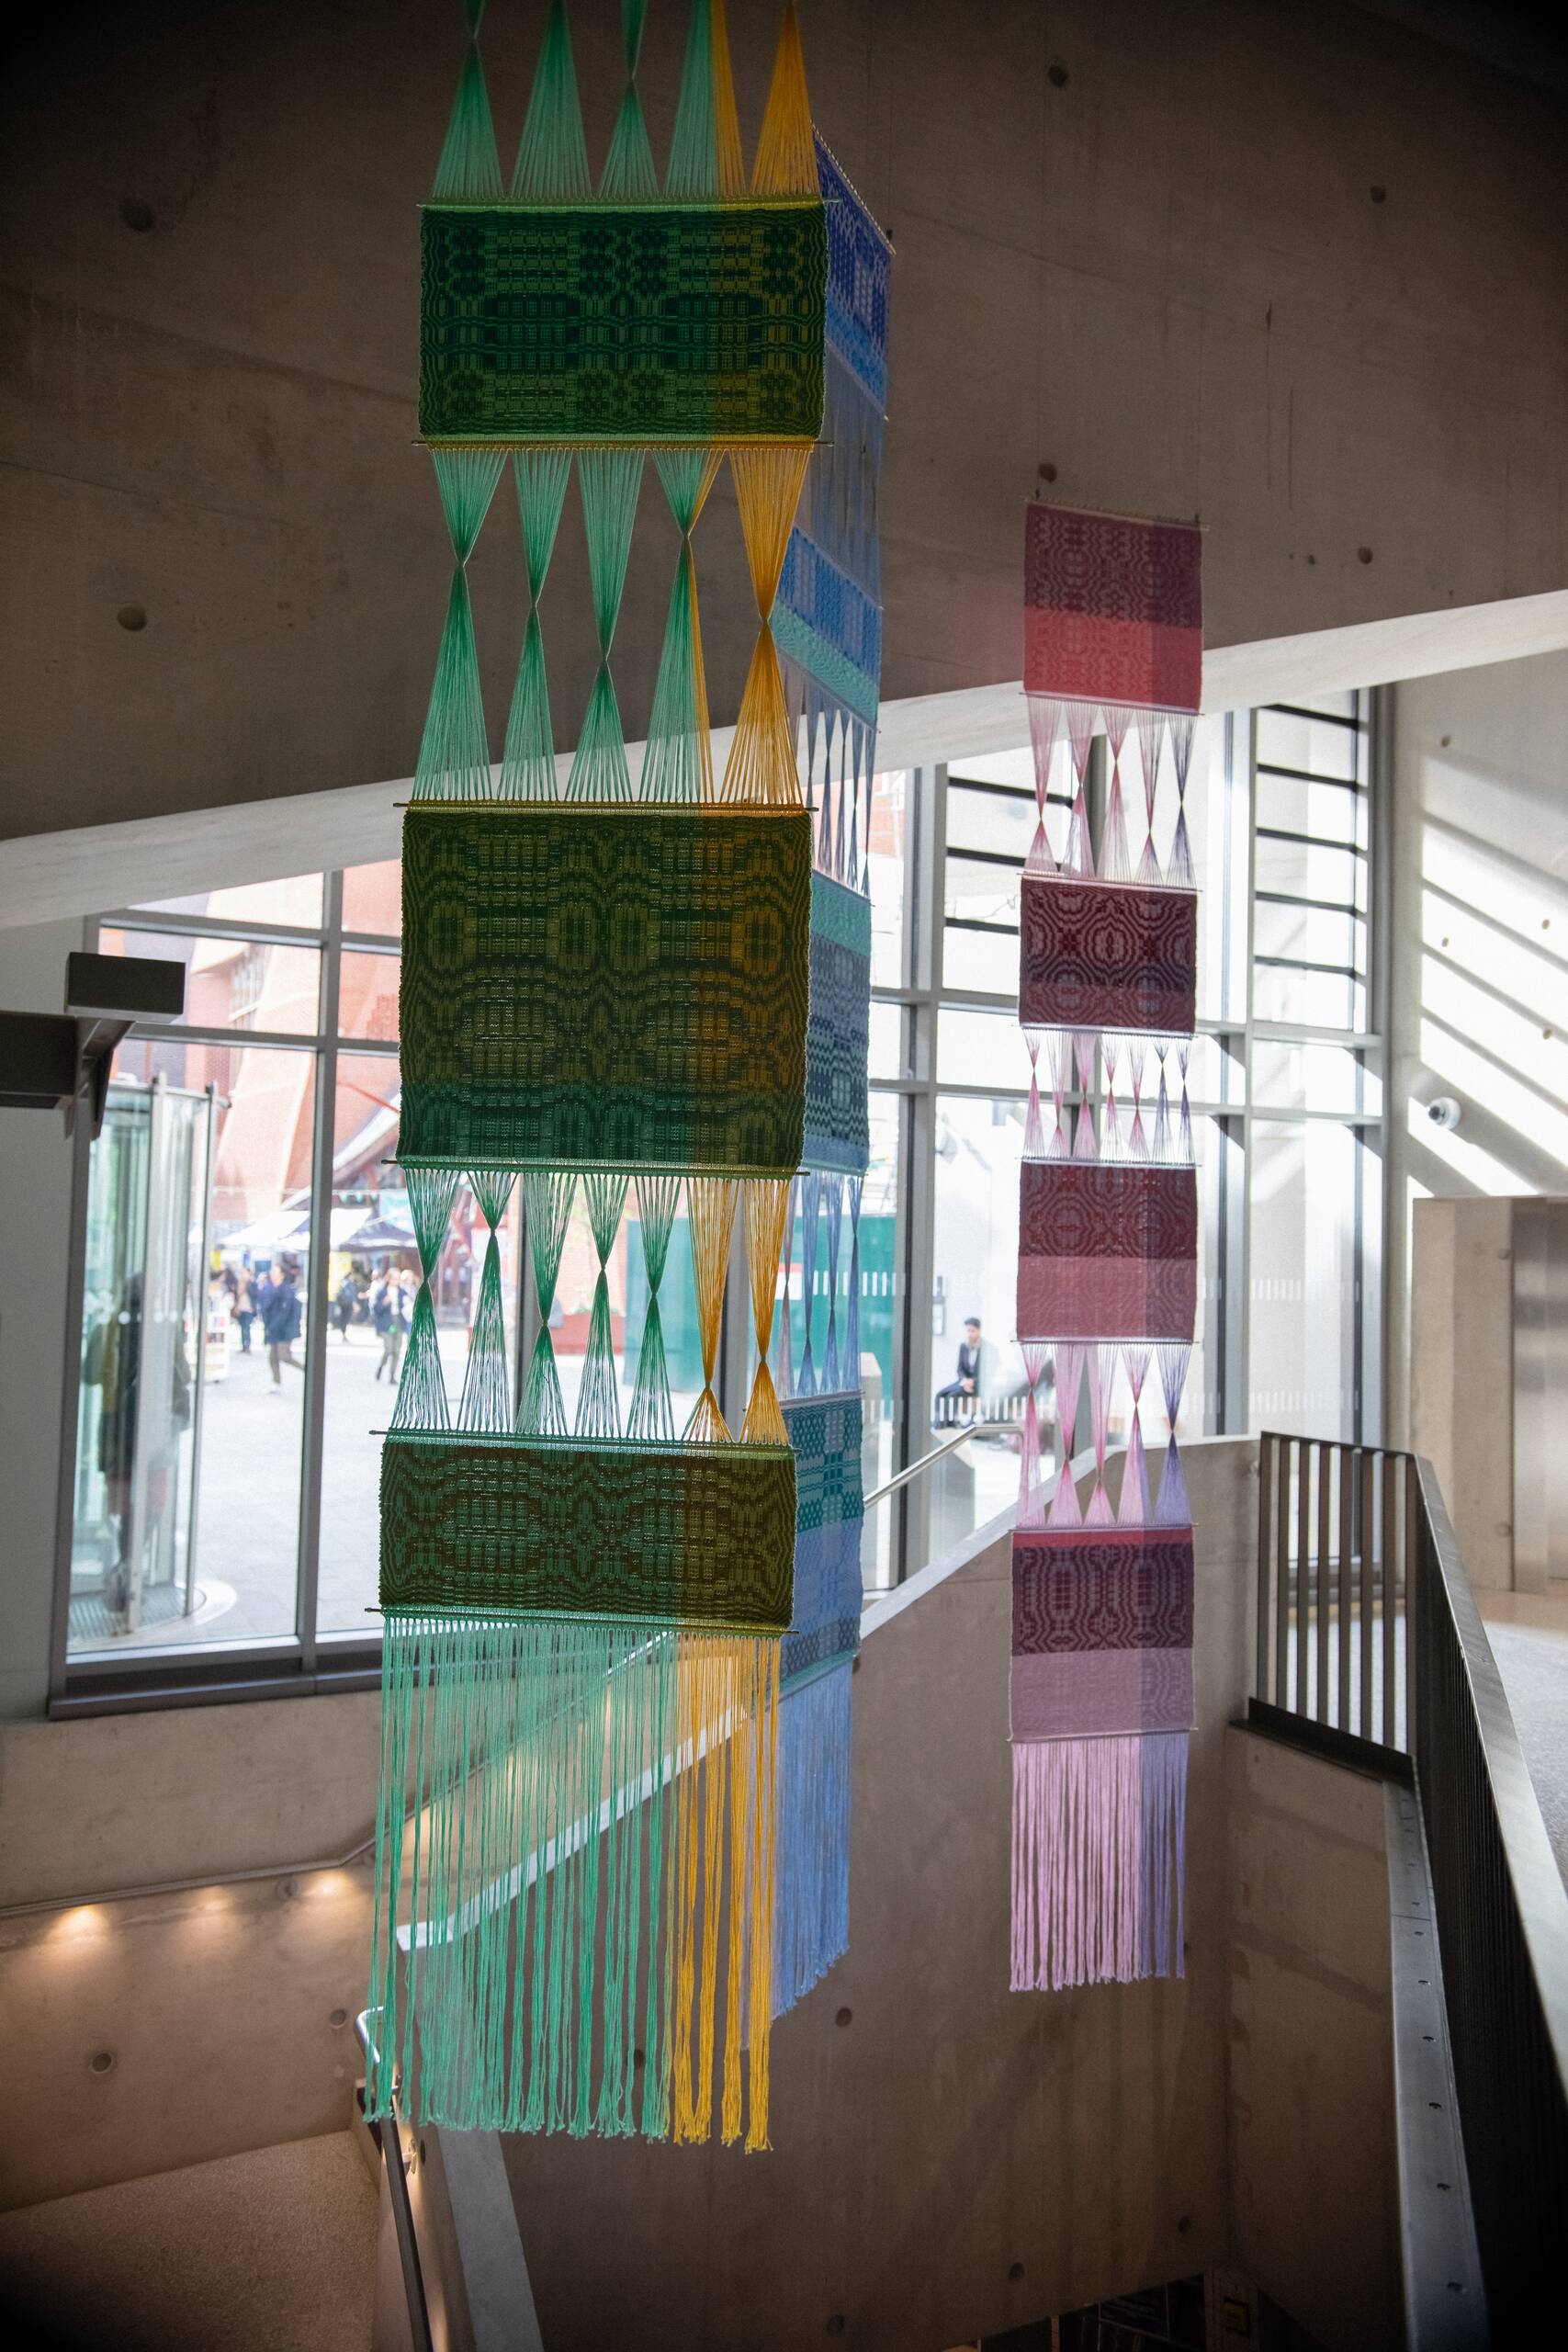 Interaction of pattern [systems of influence in red, green, & blue], Hand-woven cotton yarn, brass, aluminum (commissioned by Artiq, permanent installation at London School of Economics Marshall Building), 2022